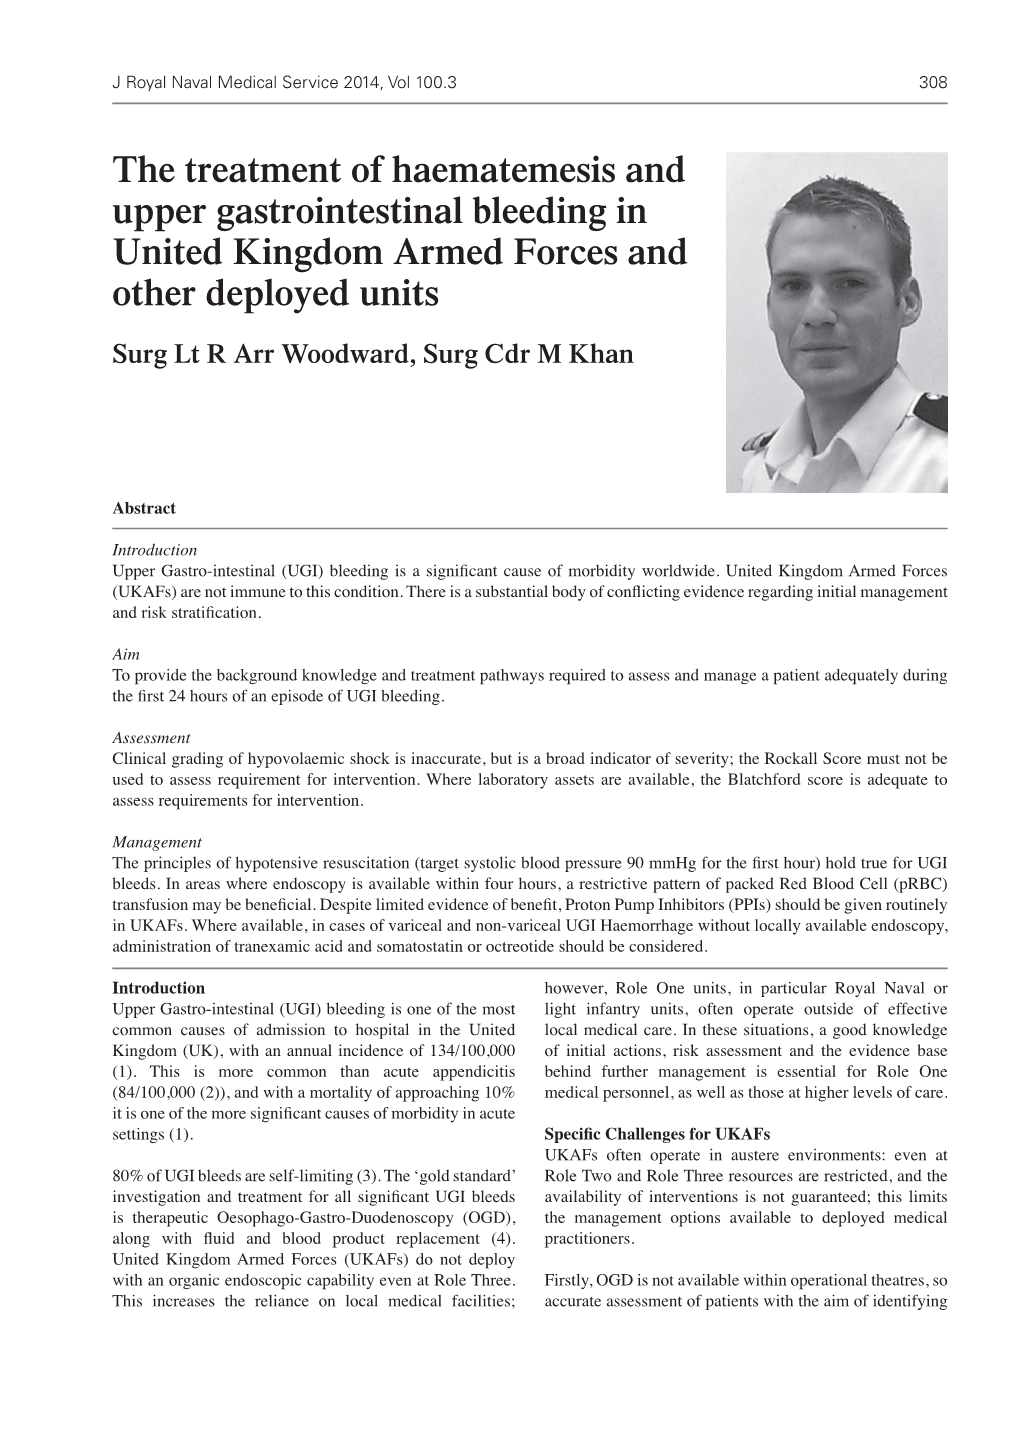 The Treatment of Haematemesis and Upper Gastrointestinal Bleeding in United Kingdom Armed Forces and Other Deployed Units